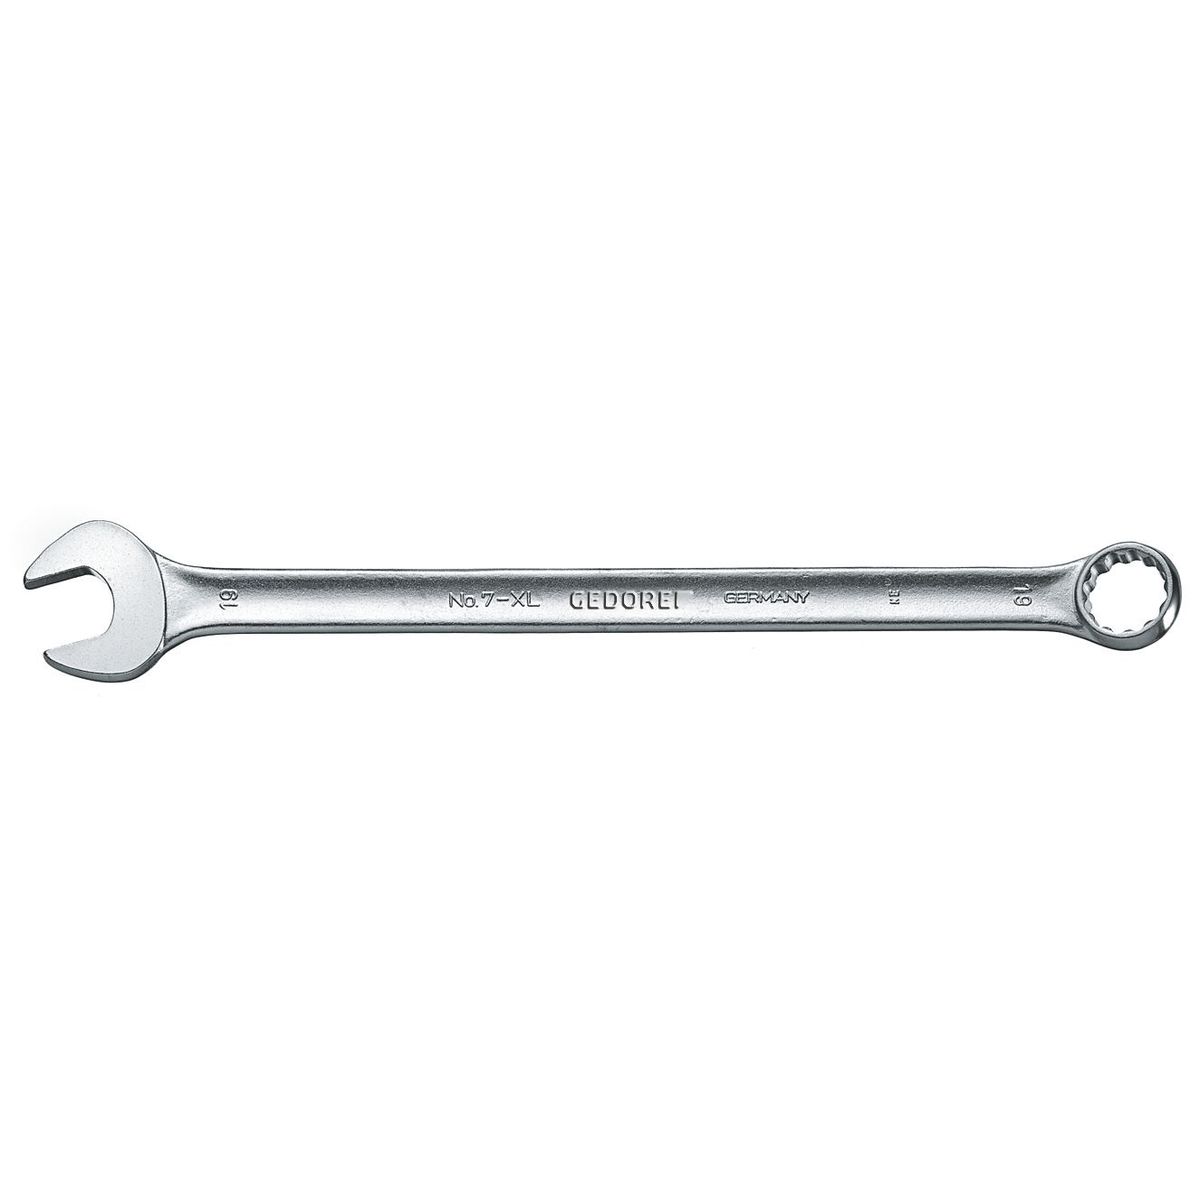 Combination spanner, extra long 36mm No.7 XL 36 Gedore